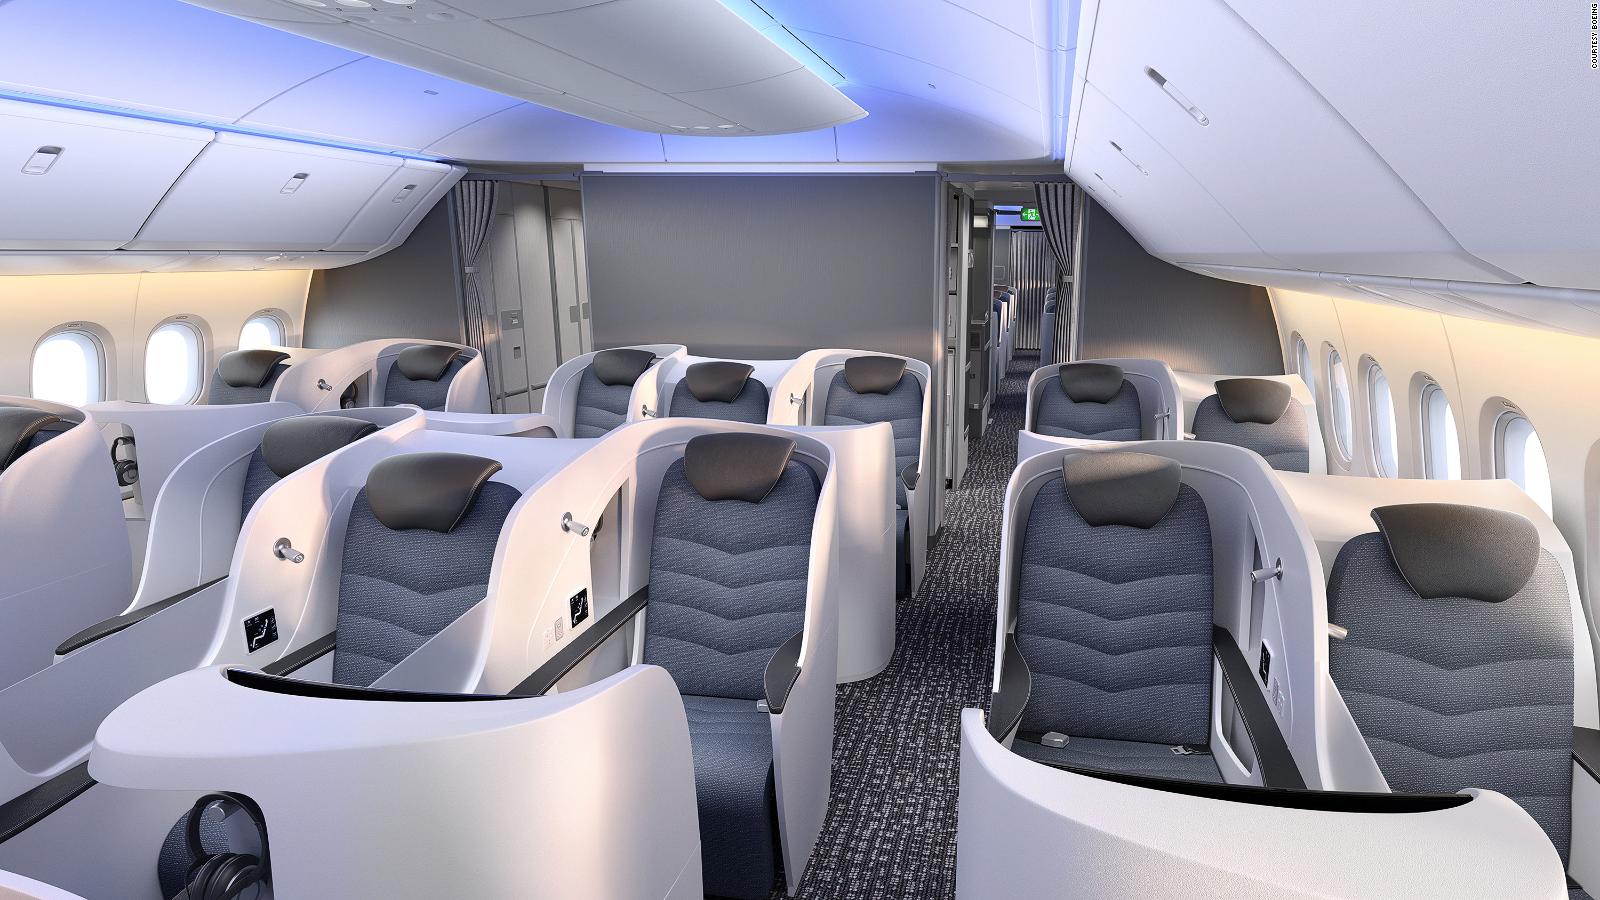 Penetration nothing Obedient Cabin mock-up offers first look inside the new Boeing 777X | CNN Travel